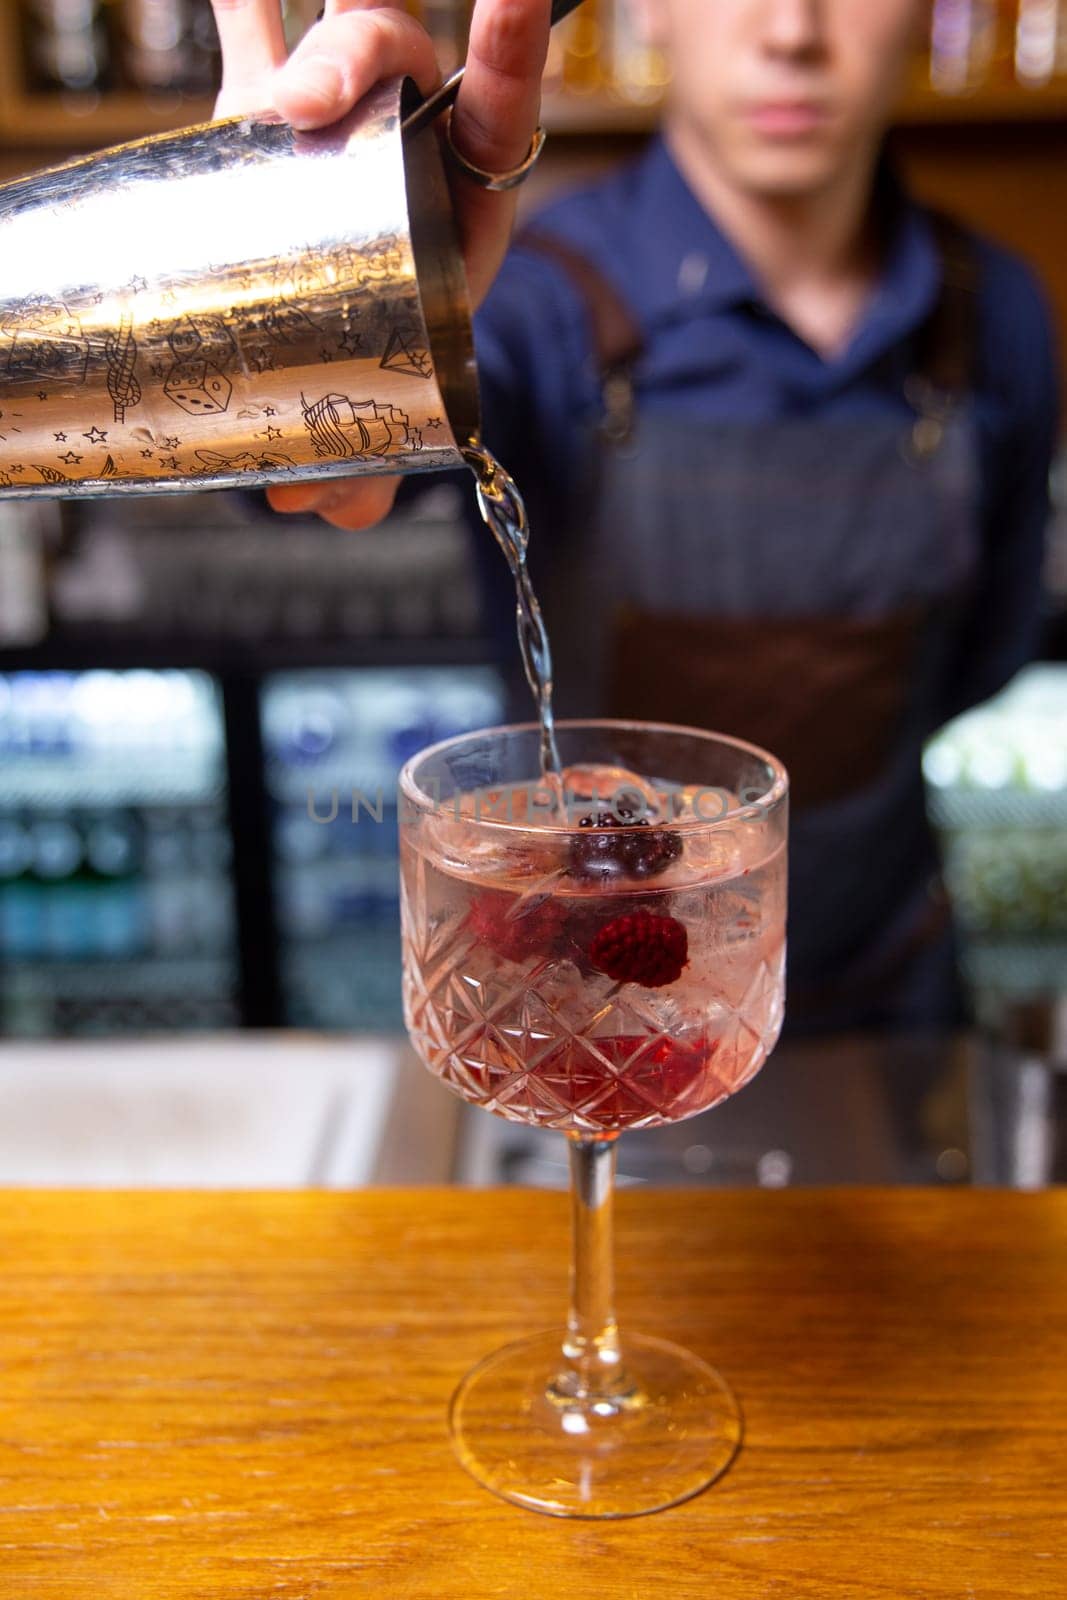 Bartender prepares a cocktail with berries at the bar